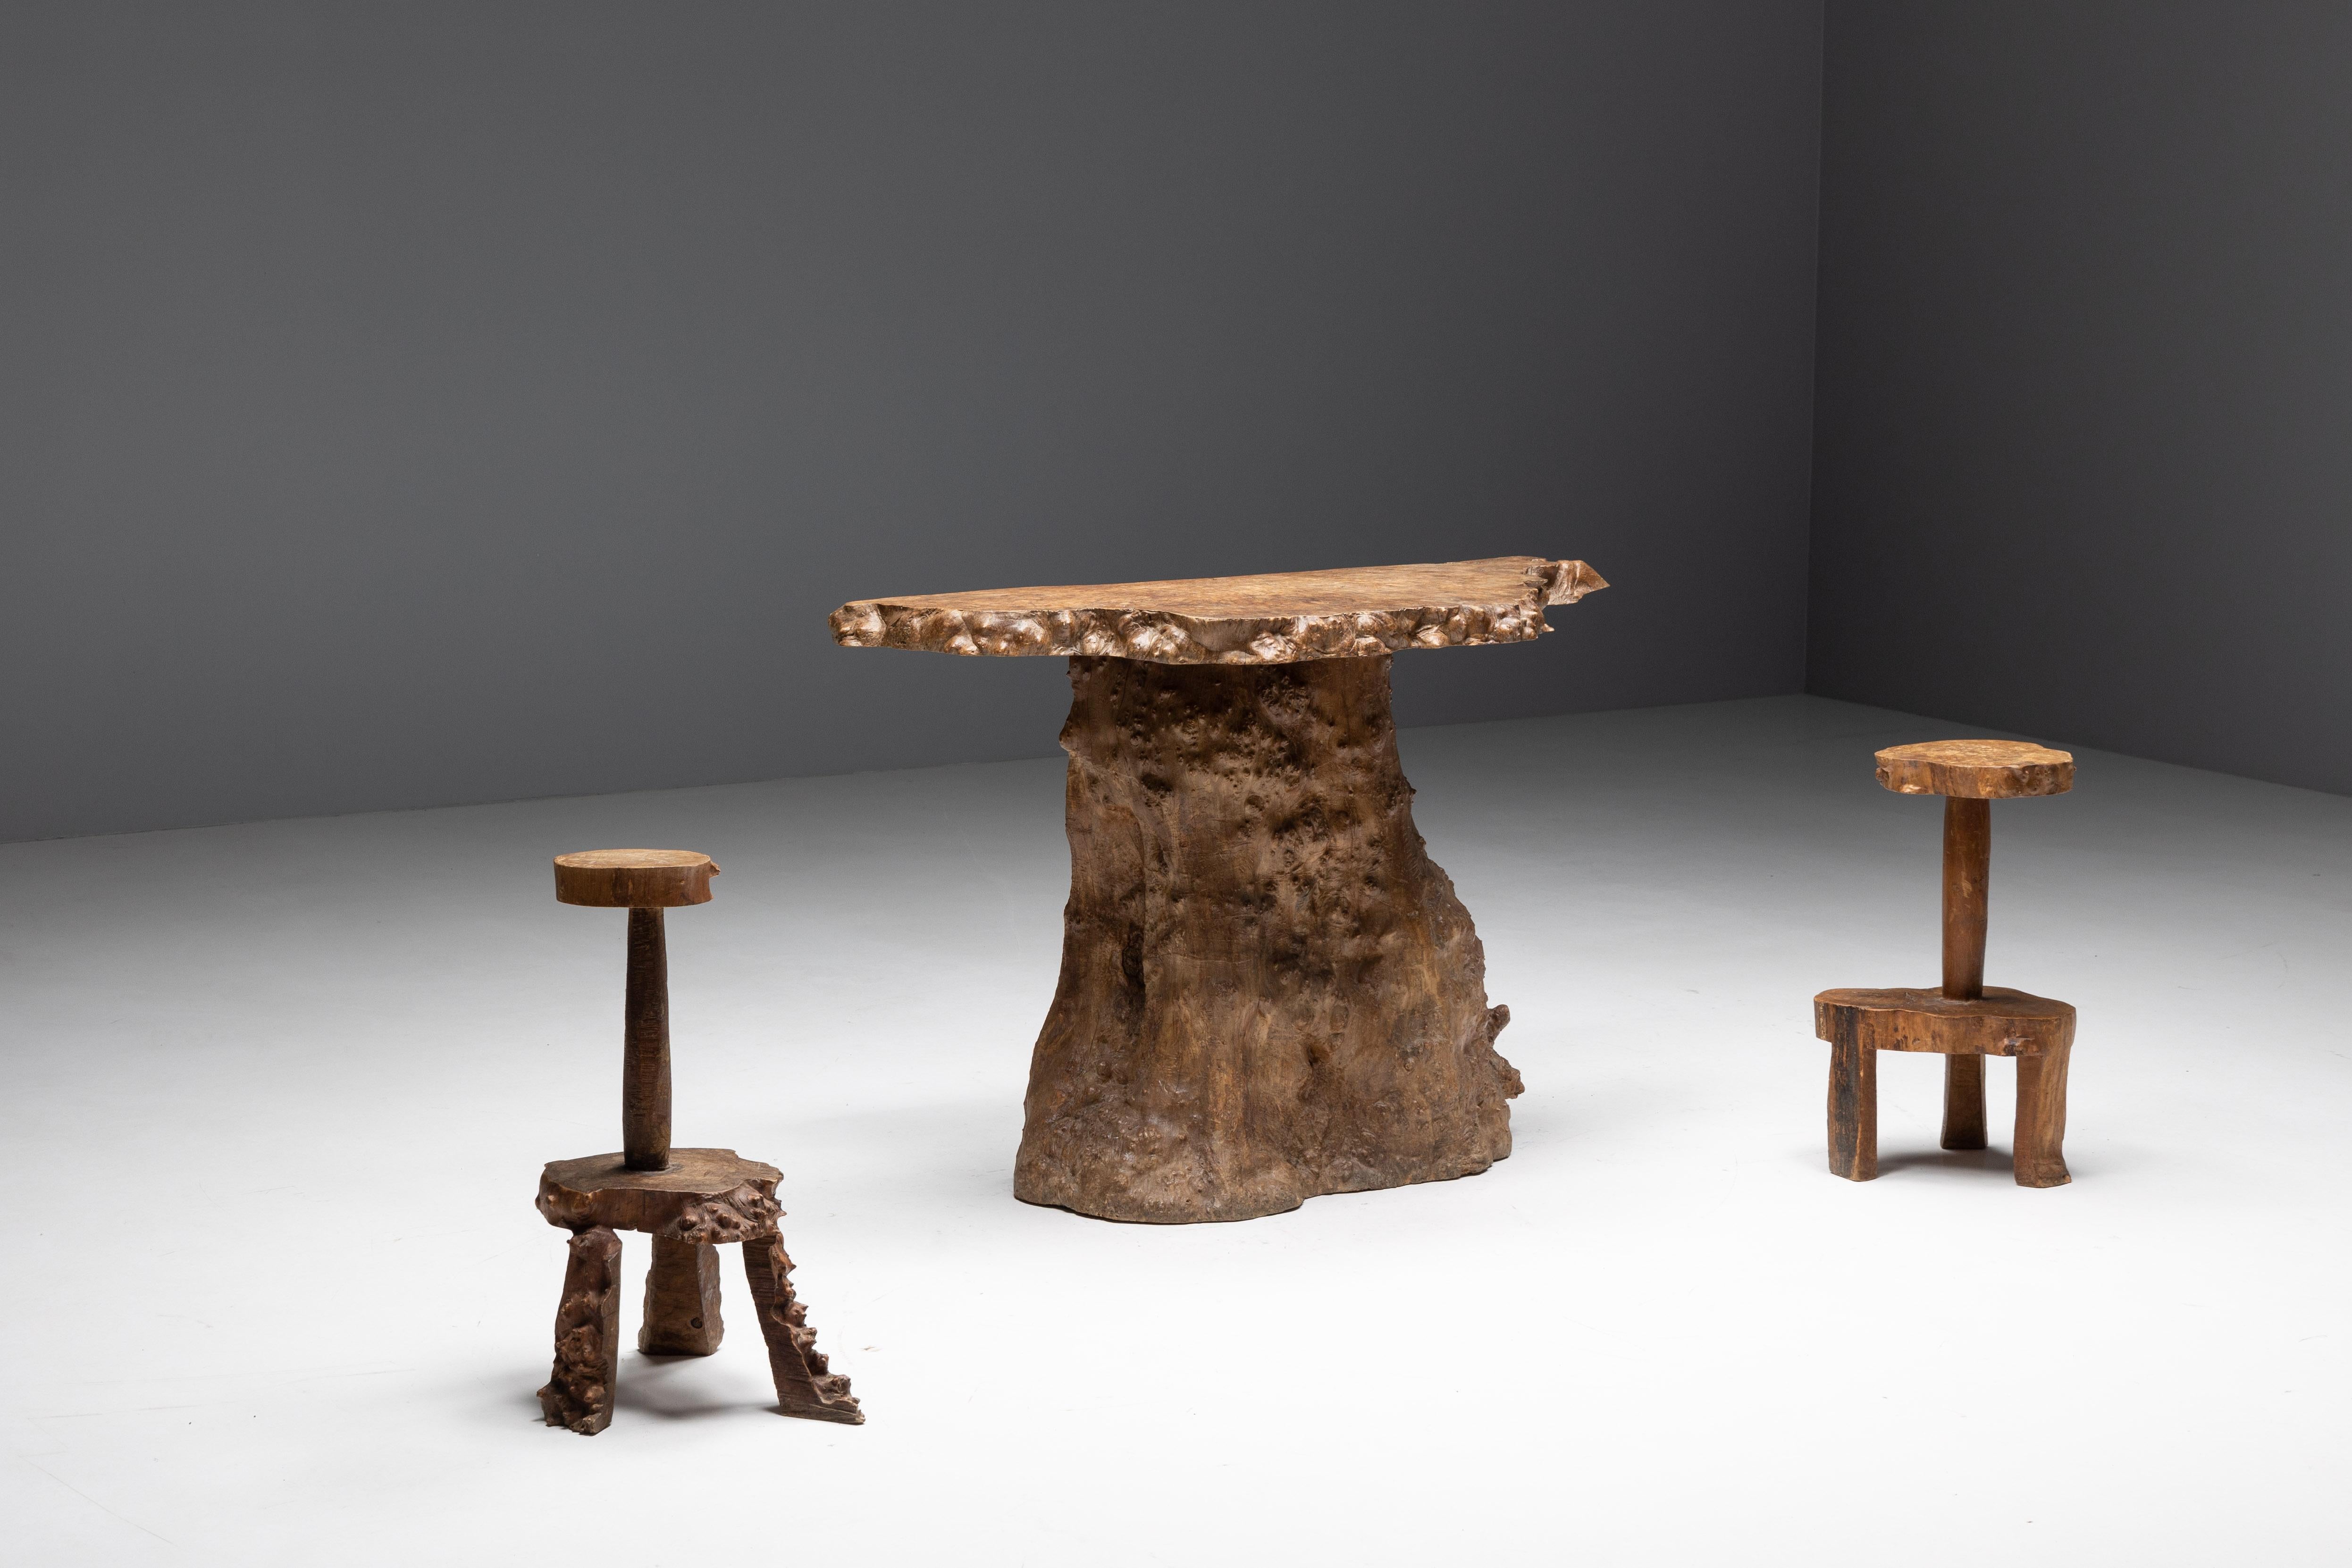 Monxylite bar set, crafted from genuine cedar tree trunks. Each piece celebrates the inherent charm found in organic irregularities. The bar's graceful curves and fluid lines evoke a sense of natural harmony, while the two accompanying tripod stools